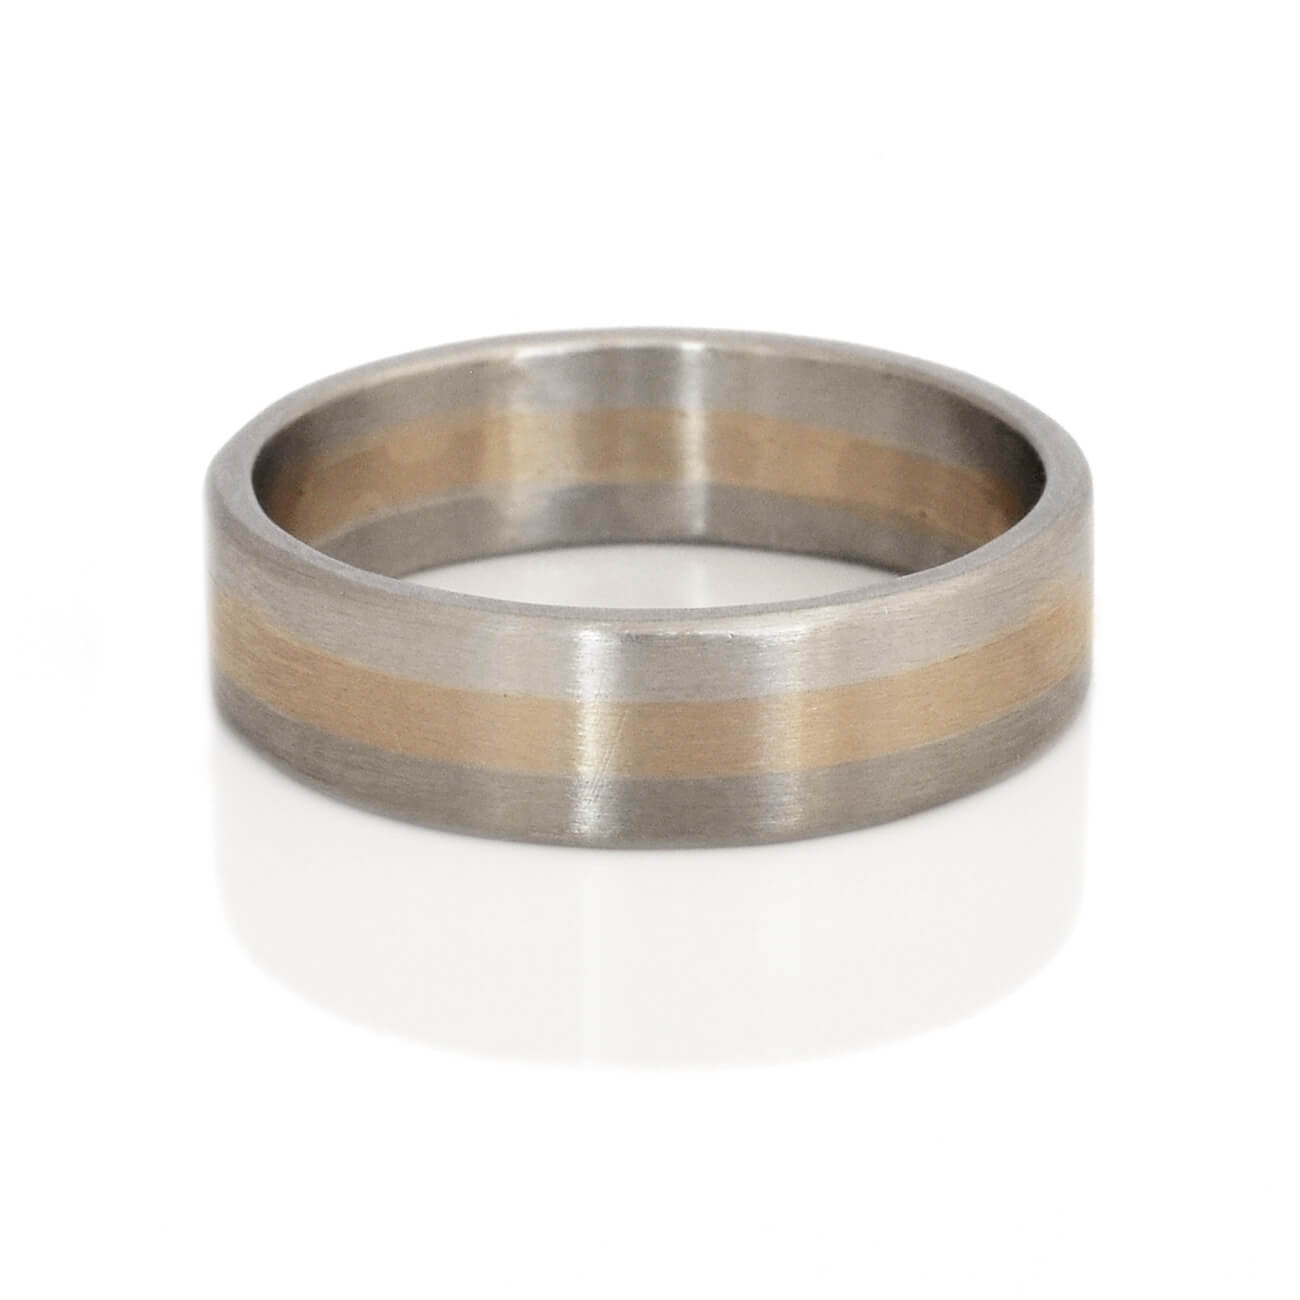 Ombre wedding band in palladium and white gold. Handmade with recycled metal.